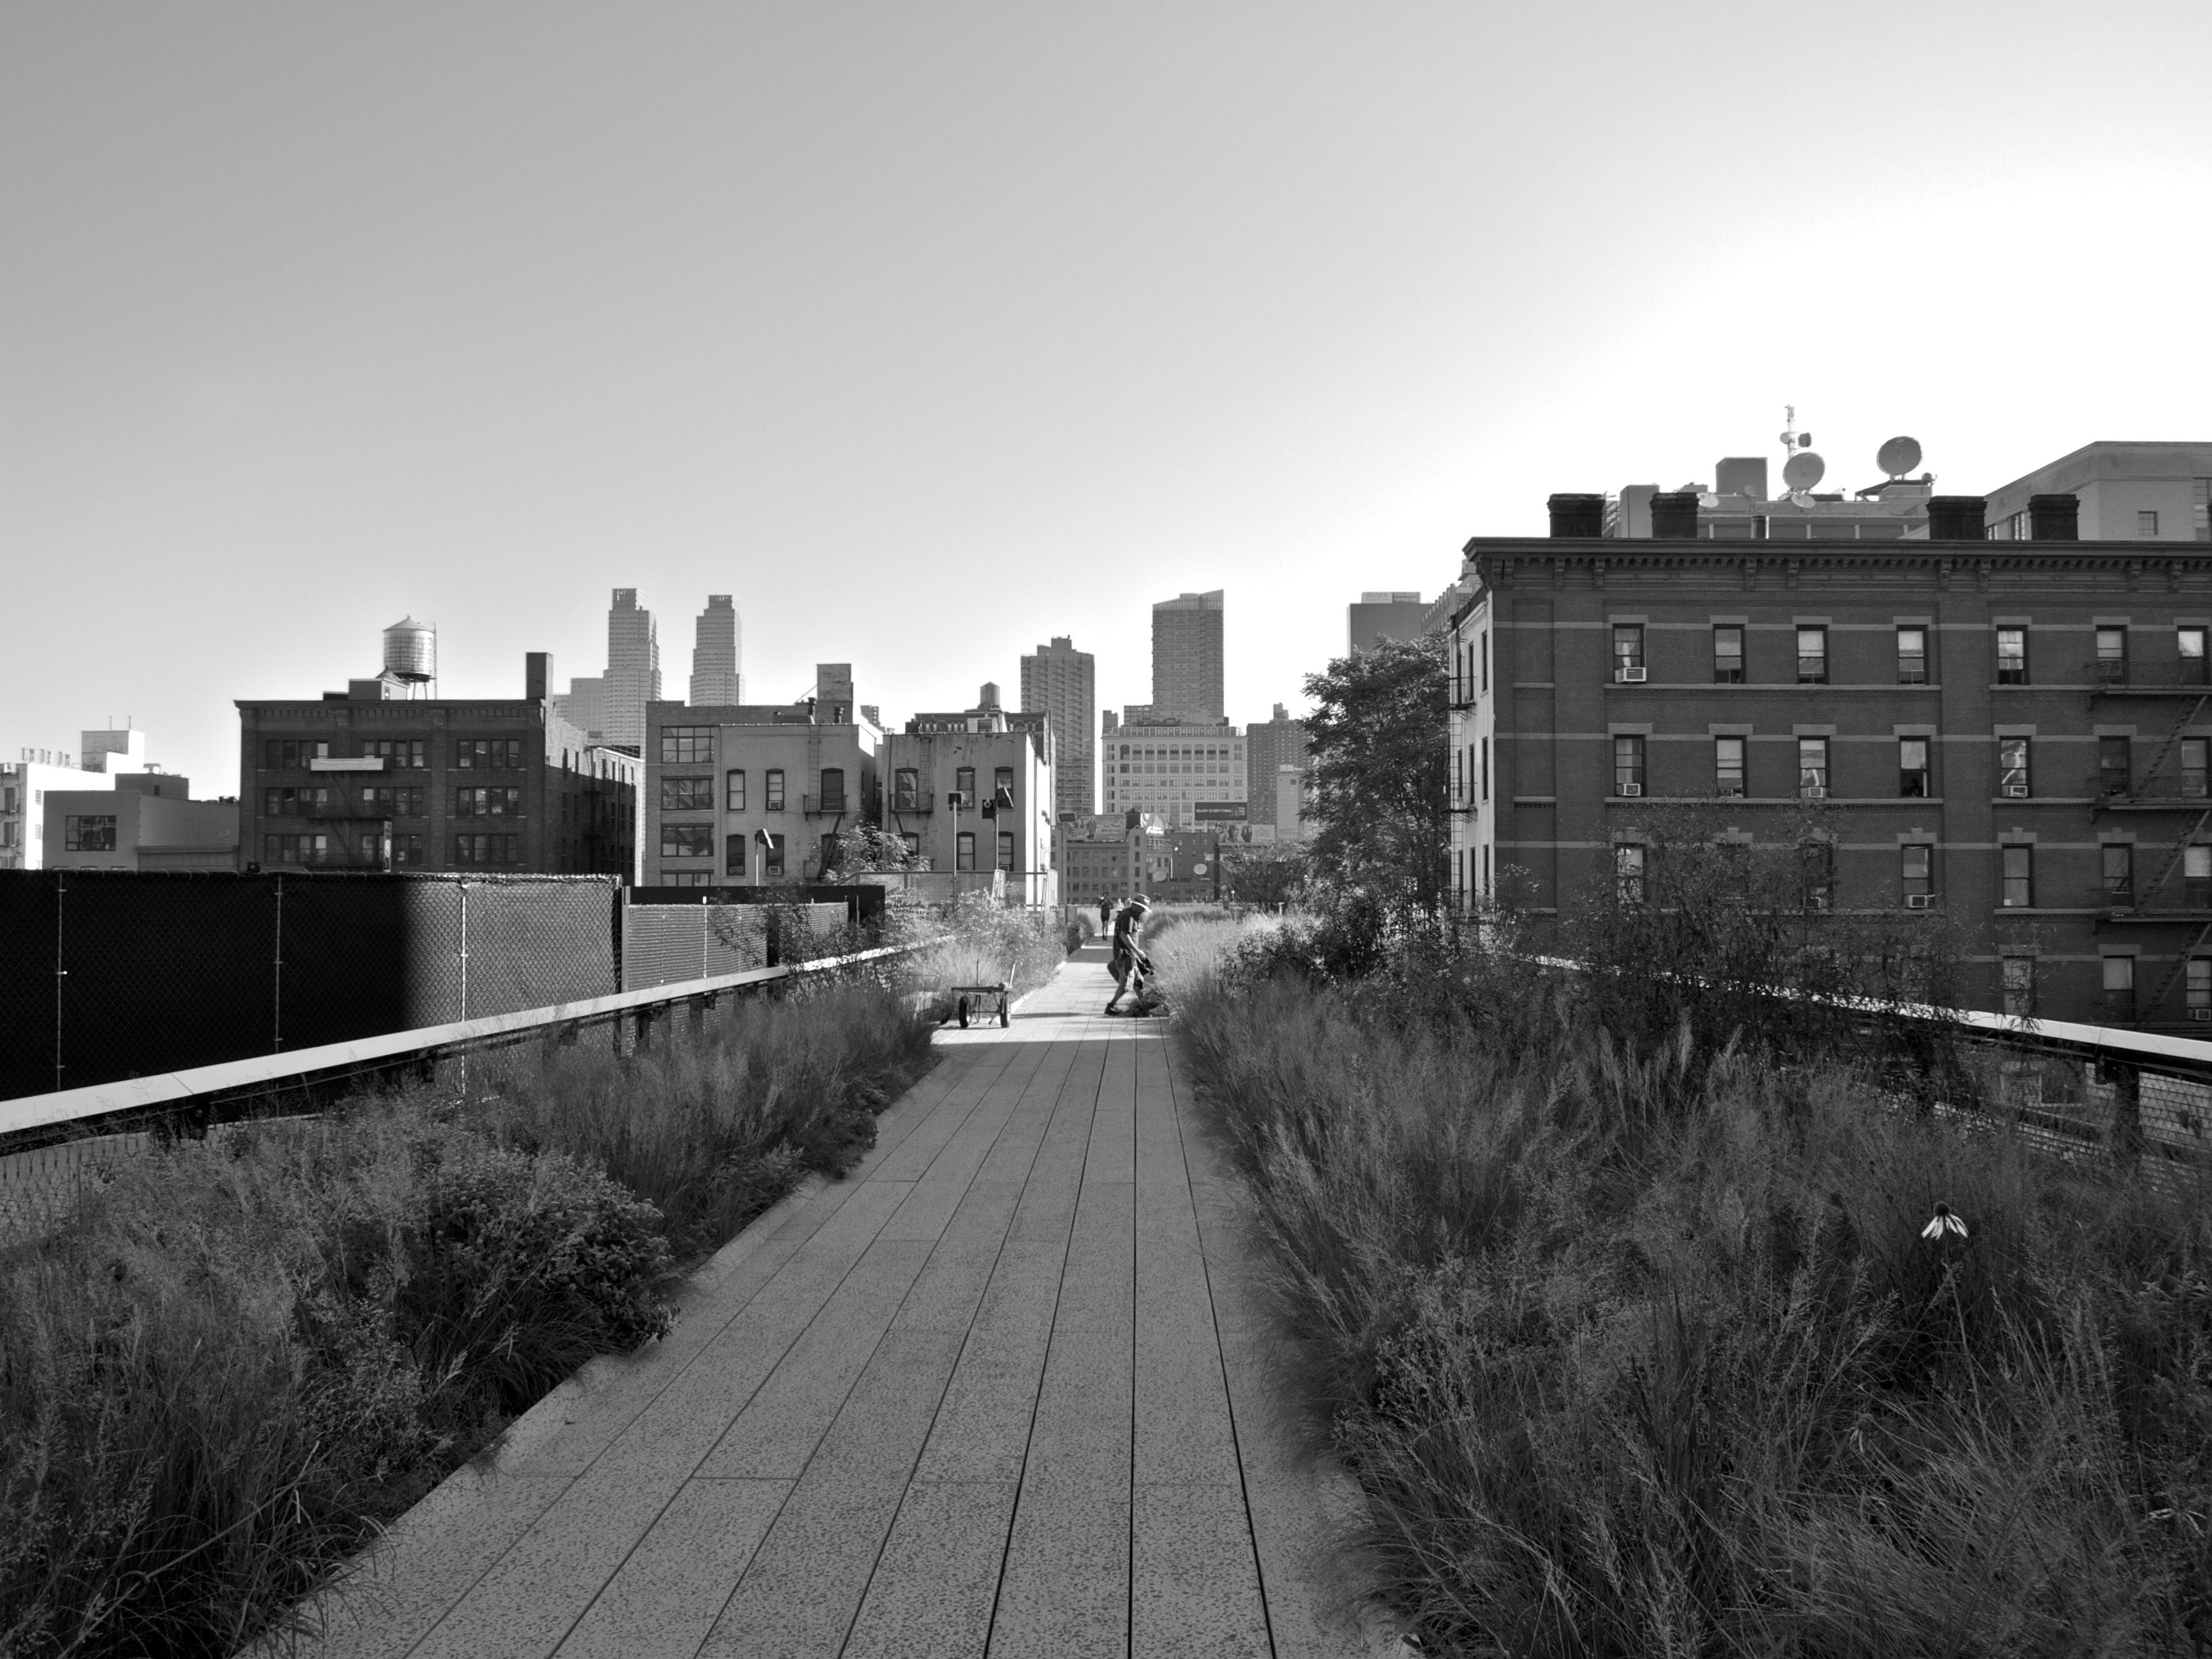 Day 235 - Looking Down The High Line